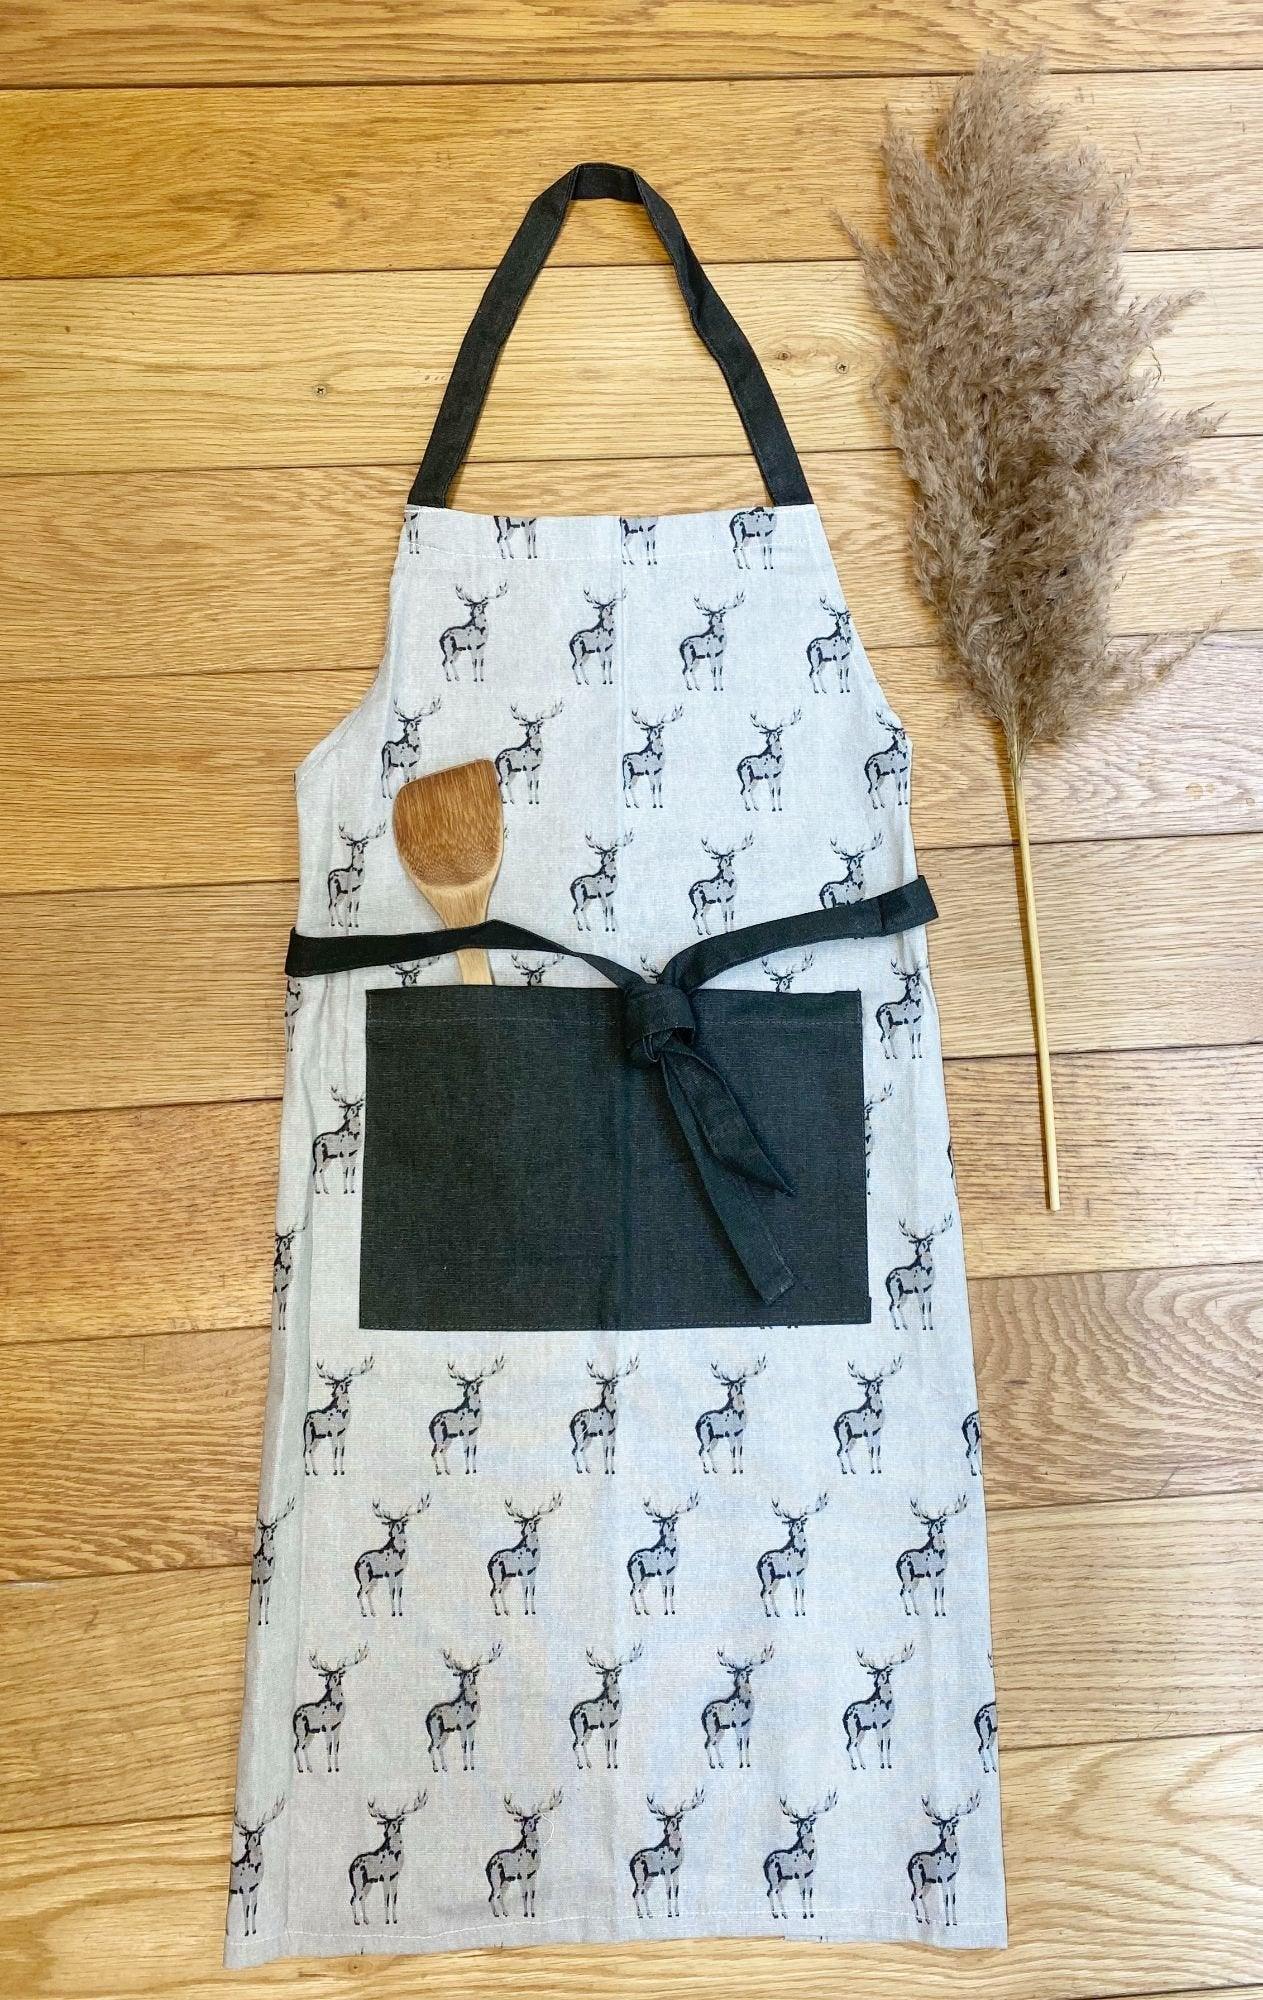 View Grey Kitchen Apron With Stag Print Design information